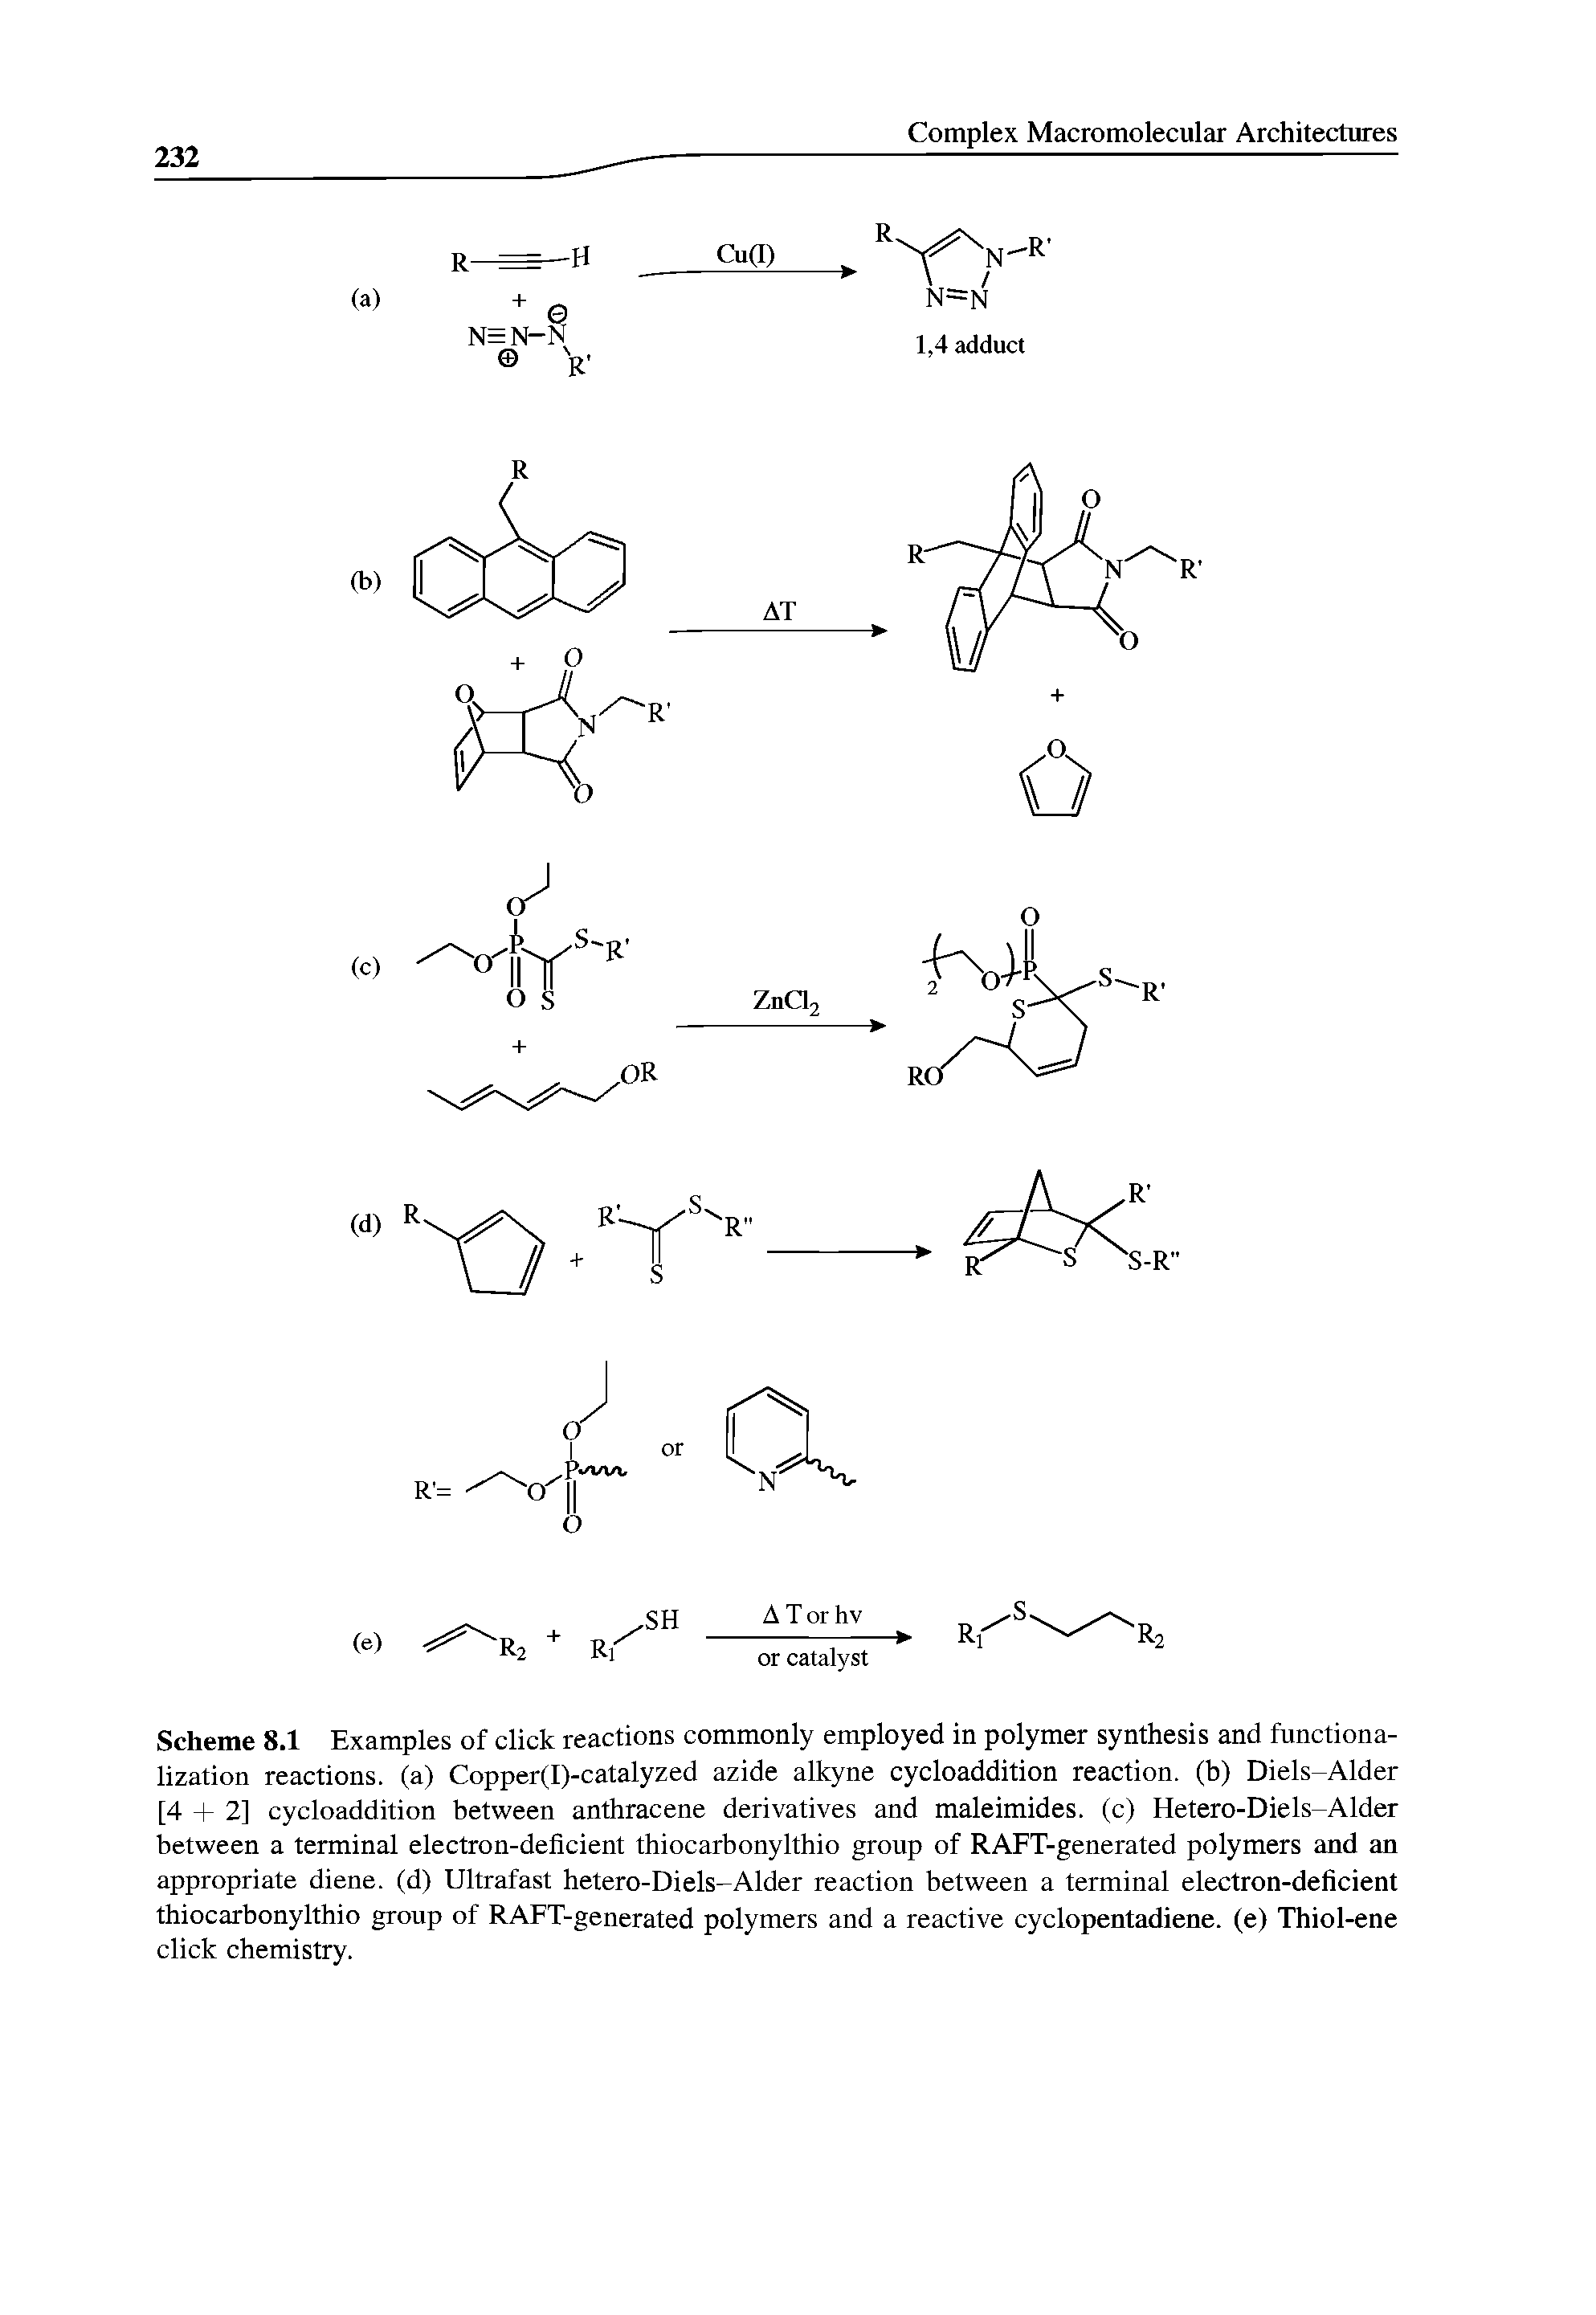 Scheme 8.1 Examples of click reactions commonly employed in polymer synthesis and functionalization reactions, (a) Copper(I)-catalyzed azide alkyne cycloaddition reaction, (b) Diels-Alder [4 + 2] cycloaddition between anthracene derivatives and maleimides. (c) Hetero-Diels-Alder between a terminal electron-deficient thiocarbonylthio group of RAFT-generated polymers and an appropriate diene, (d) Ultrafast hetero-Diels-Alder reaction between a terminal electron-deficient thiocarbonylthio group of RAFT-generated polymers and a reactive cyclopentadiene. (e) Thiol-ene click chemistry.